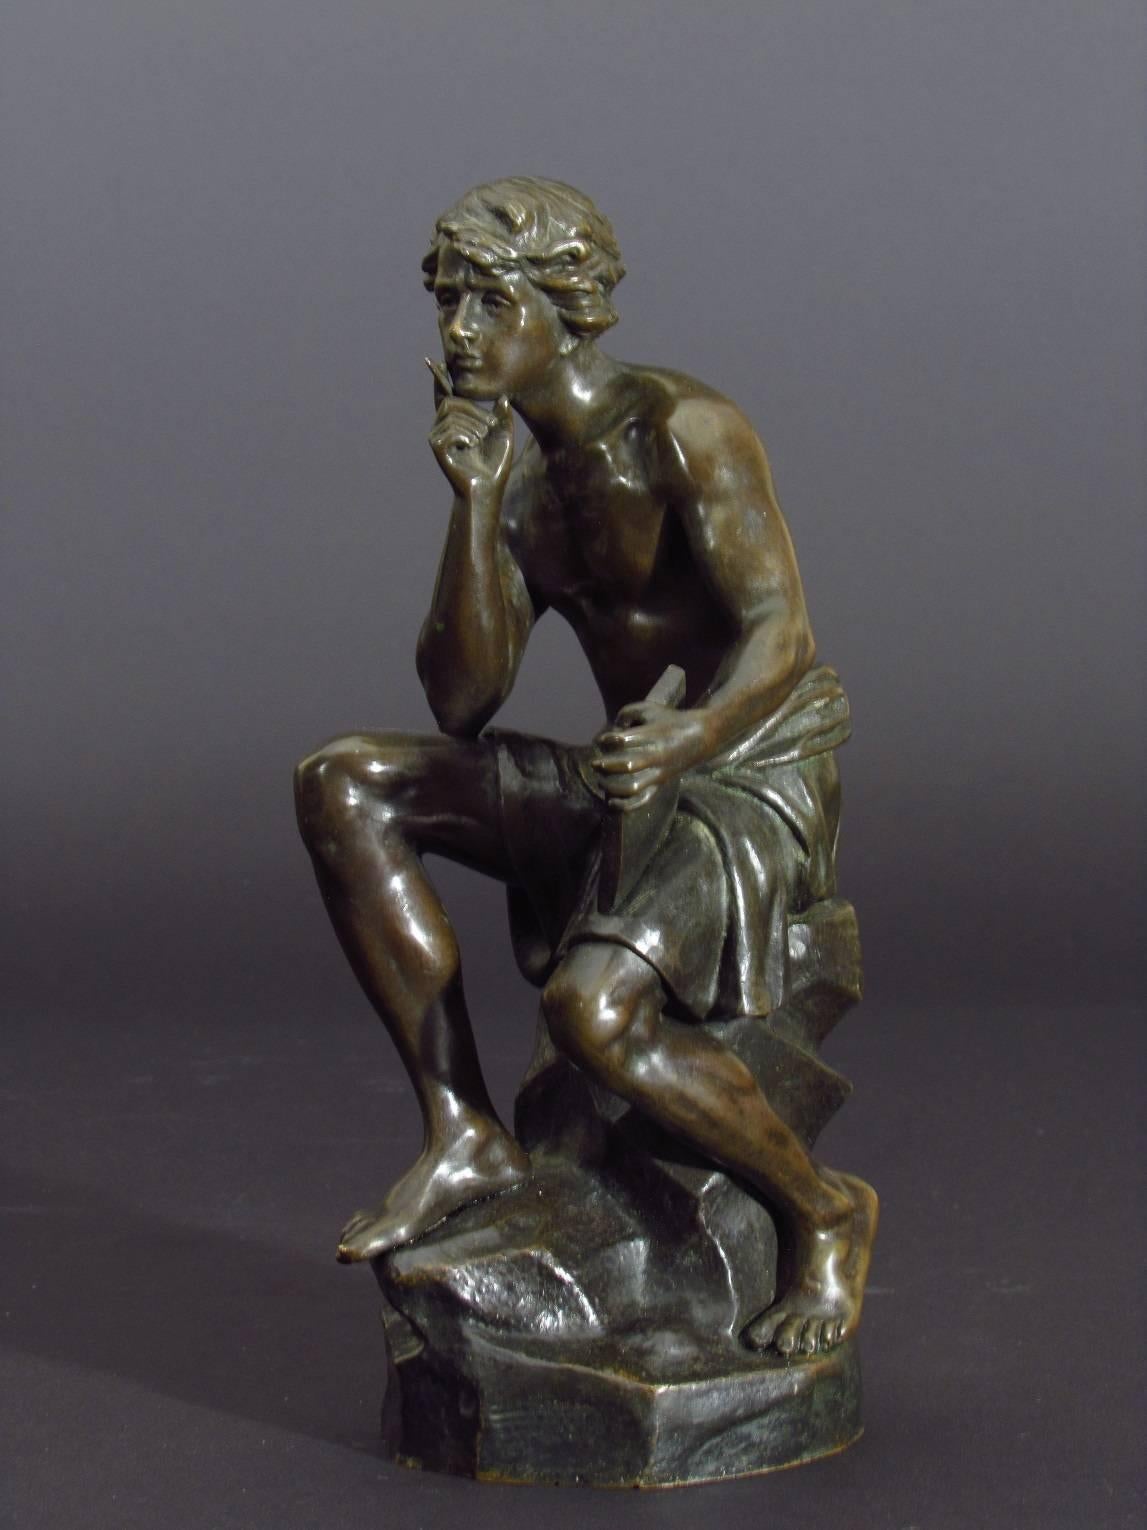 Seated Youth - Romantic Sculpture by Émile Nestor Joseph Carlier